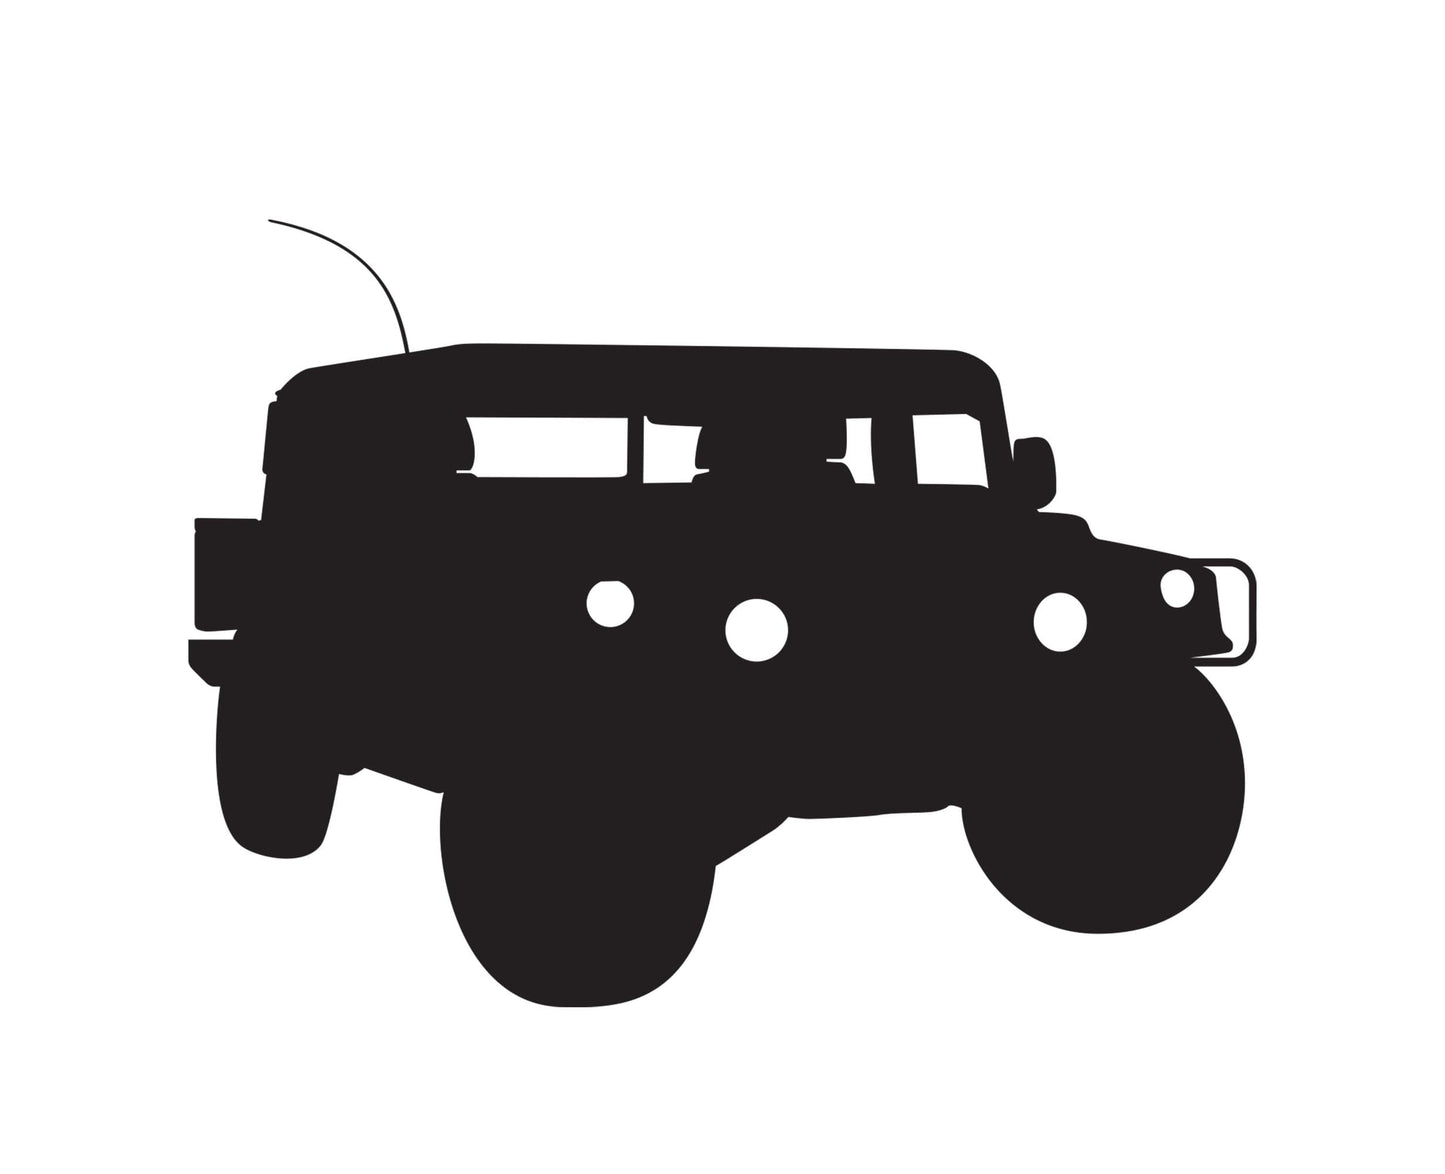 Military Hummer Wall Decal Sticker. Humvee Wall Decal. #215